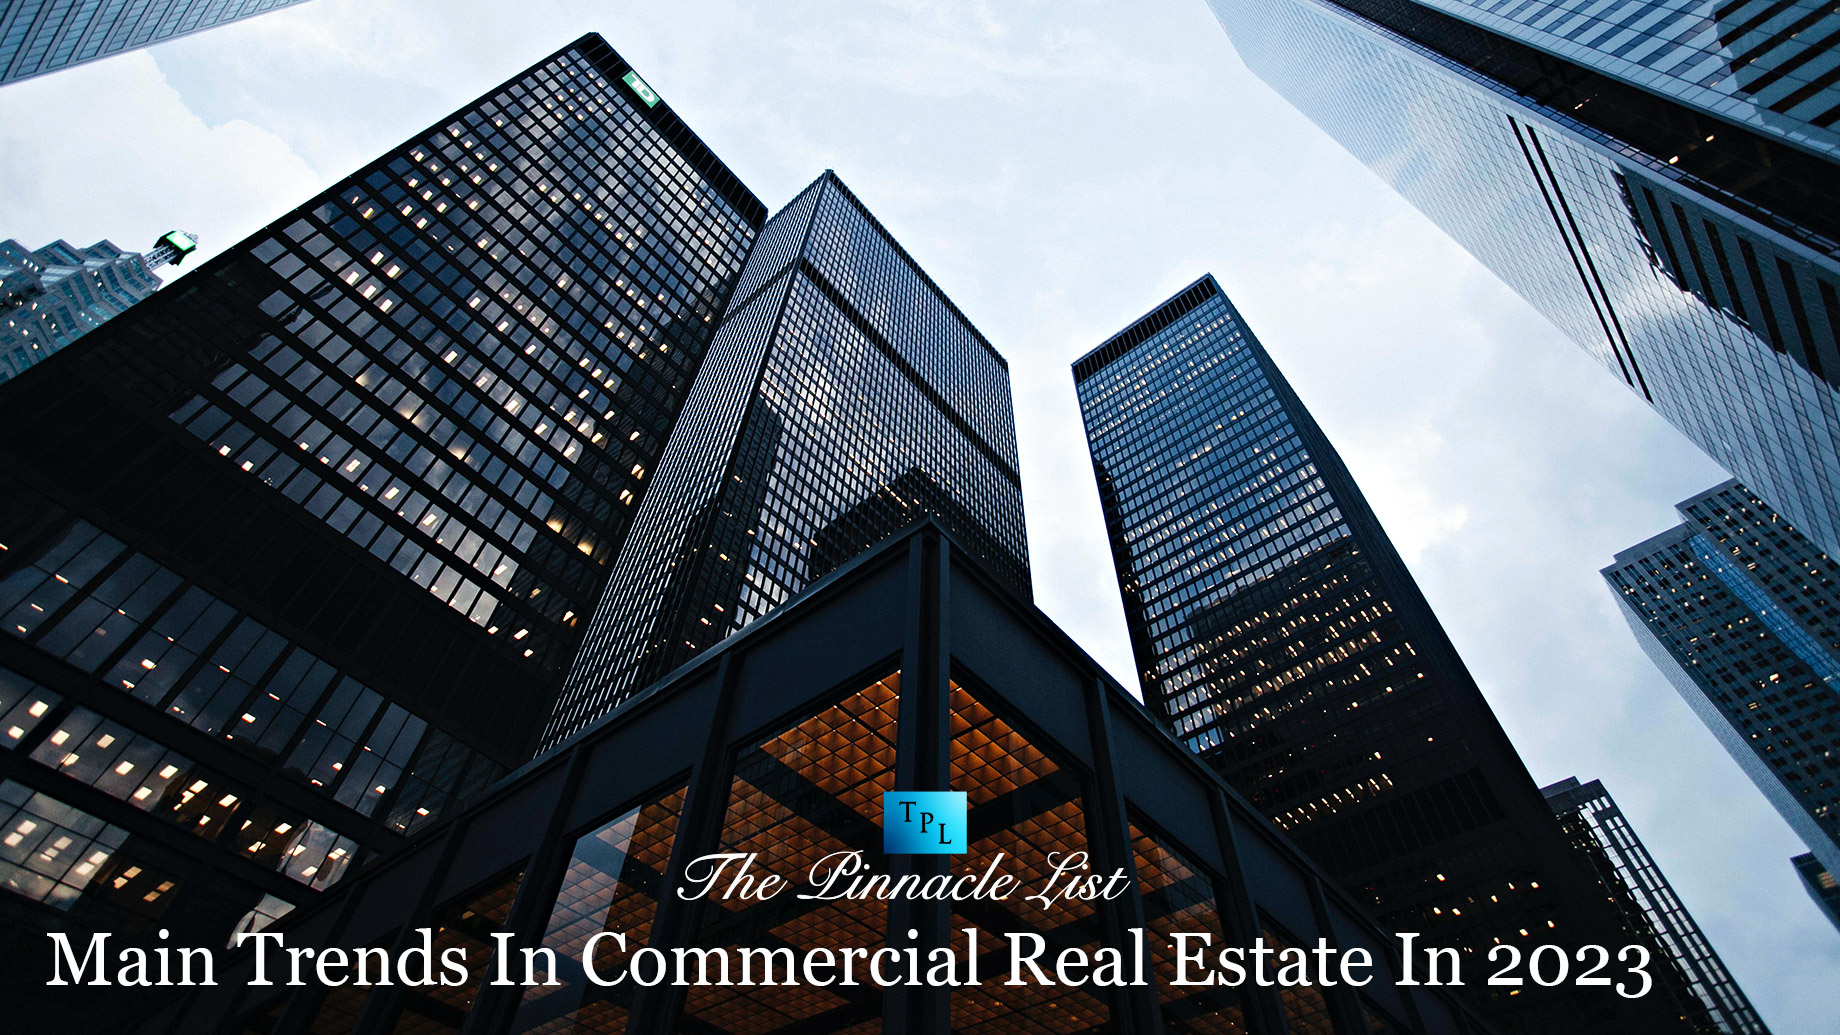 Main Trends In Commercial Real Estate In 2023